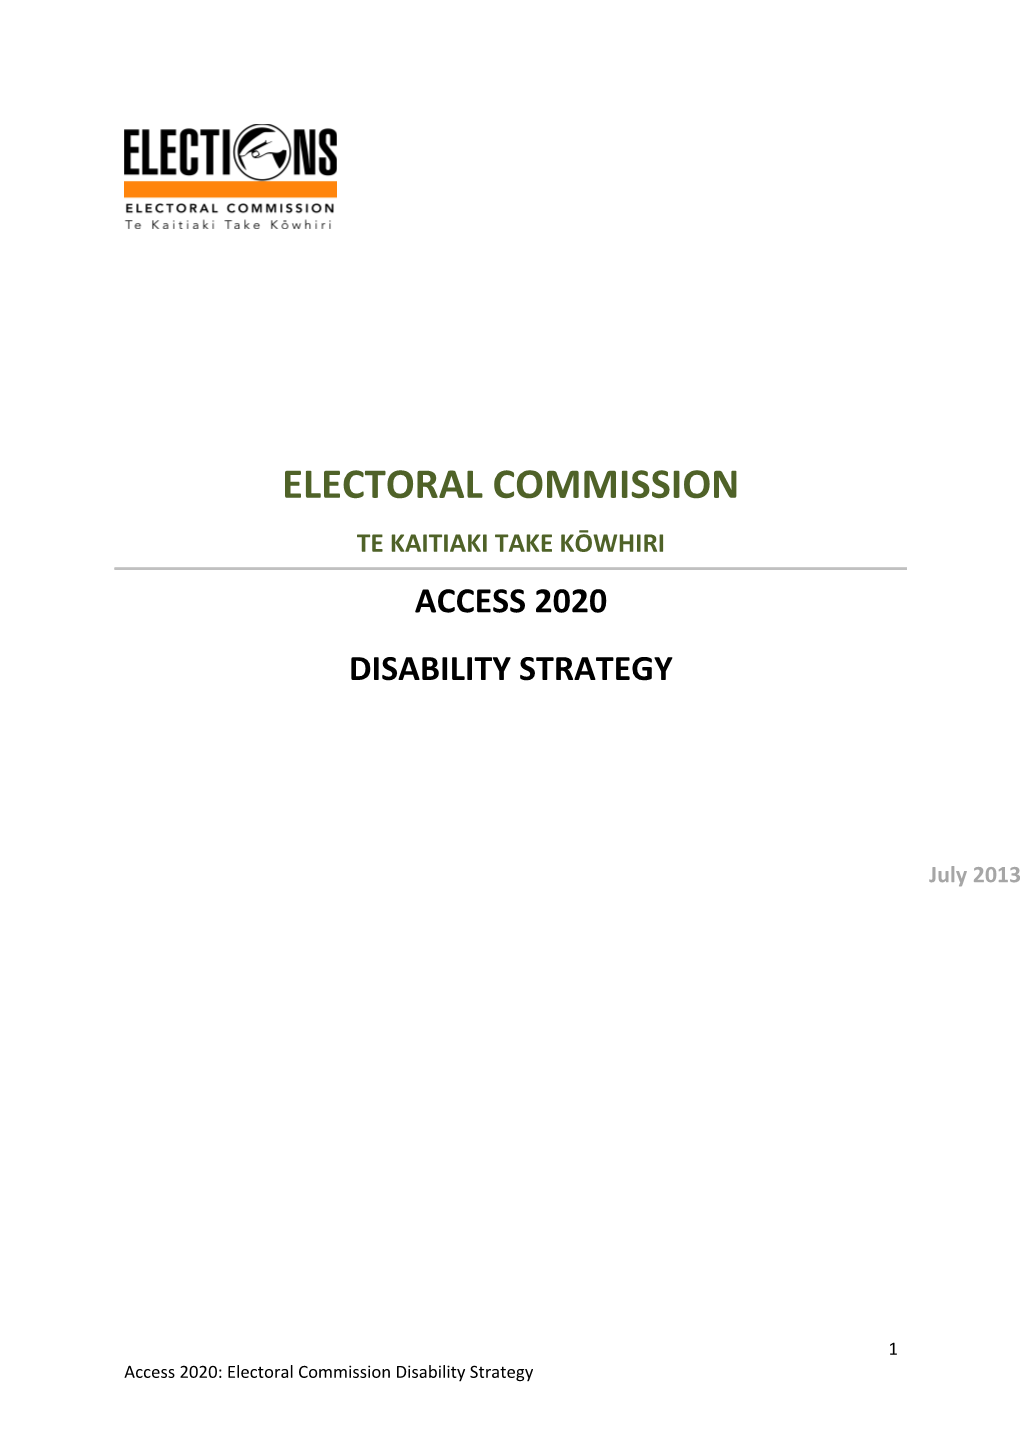 Since 2005, the Electoral Commission Has Been Working to Improve Access to Electoral Events